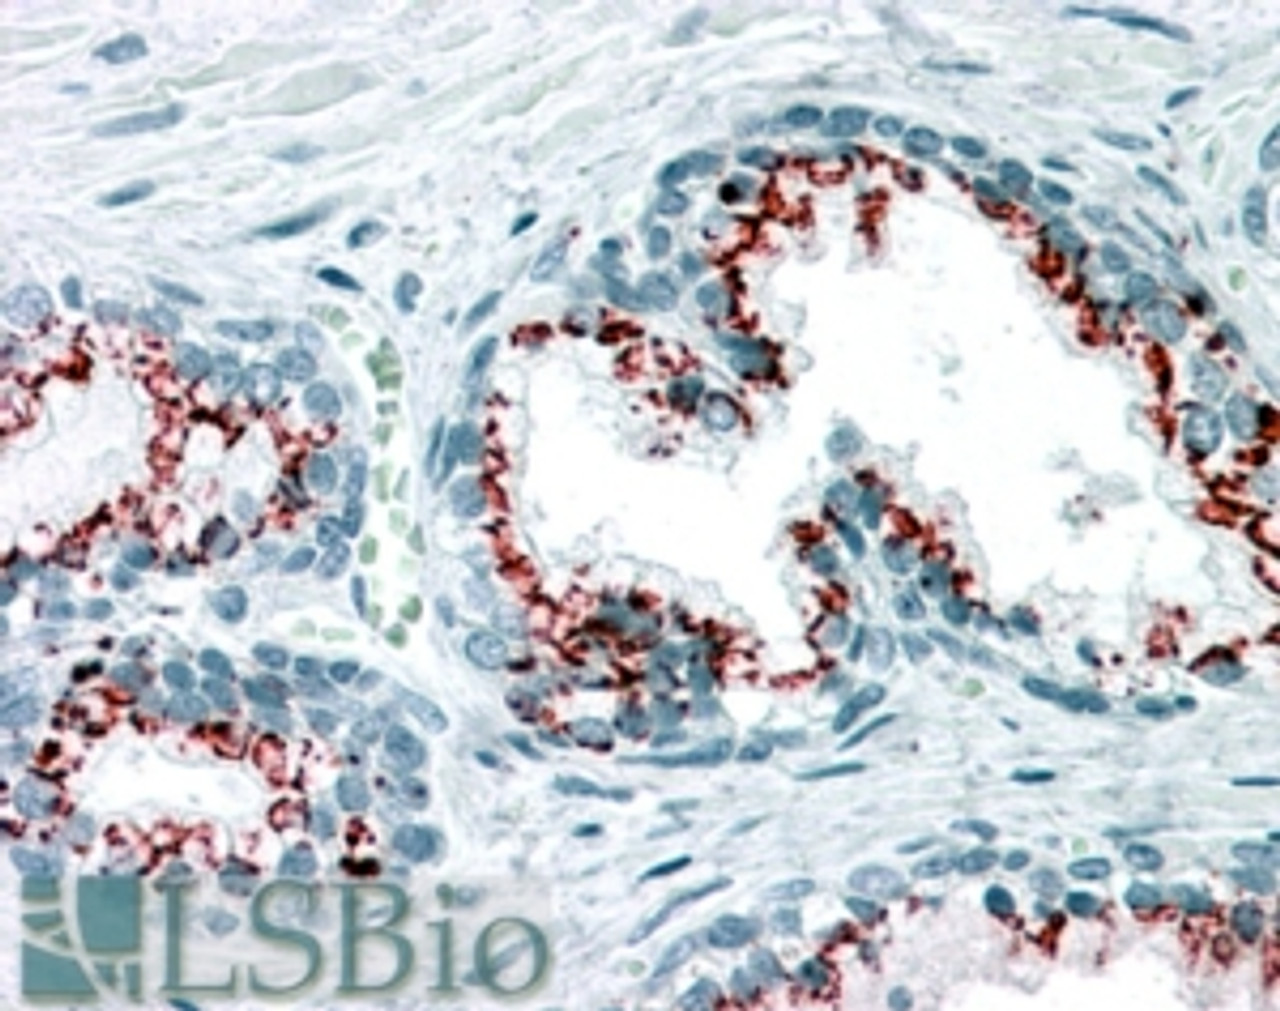 45-688 (3.75ug/ml) staining of paraffin embedded Human Prostate. Steamed antigen retrieval with citrate buffer pH 6, AP-staining.